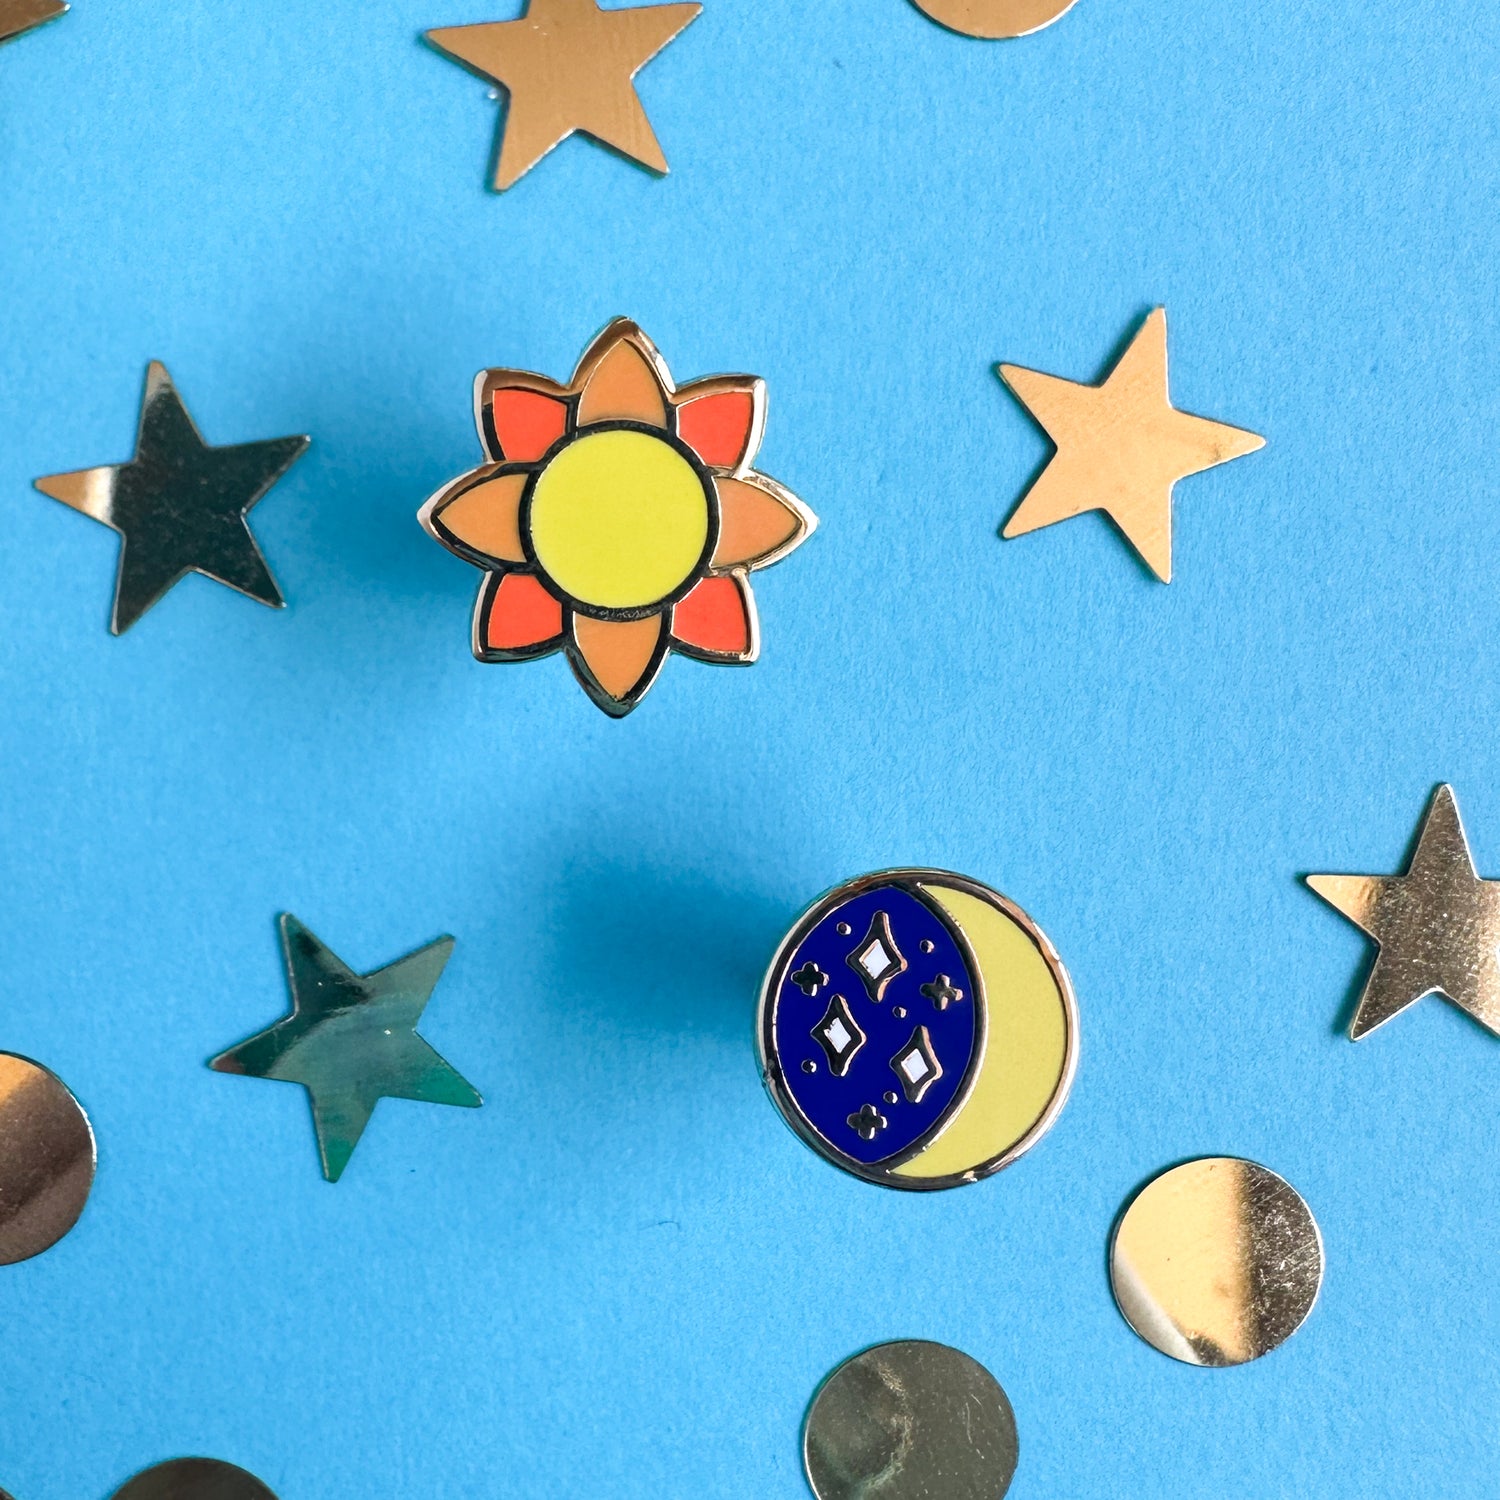 Two stud earrings one is shaped like a moon one is shaped like a sun. The earrings are on a blue background surrounded by gold glitter confetti shaped like stars and circles.